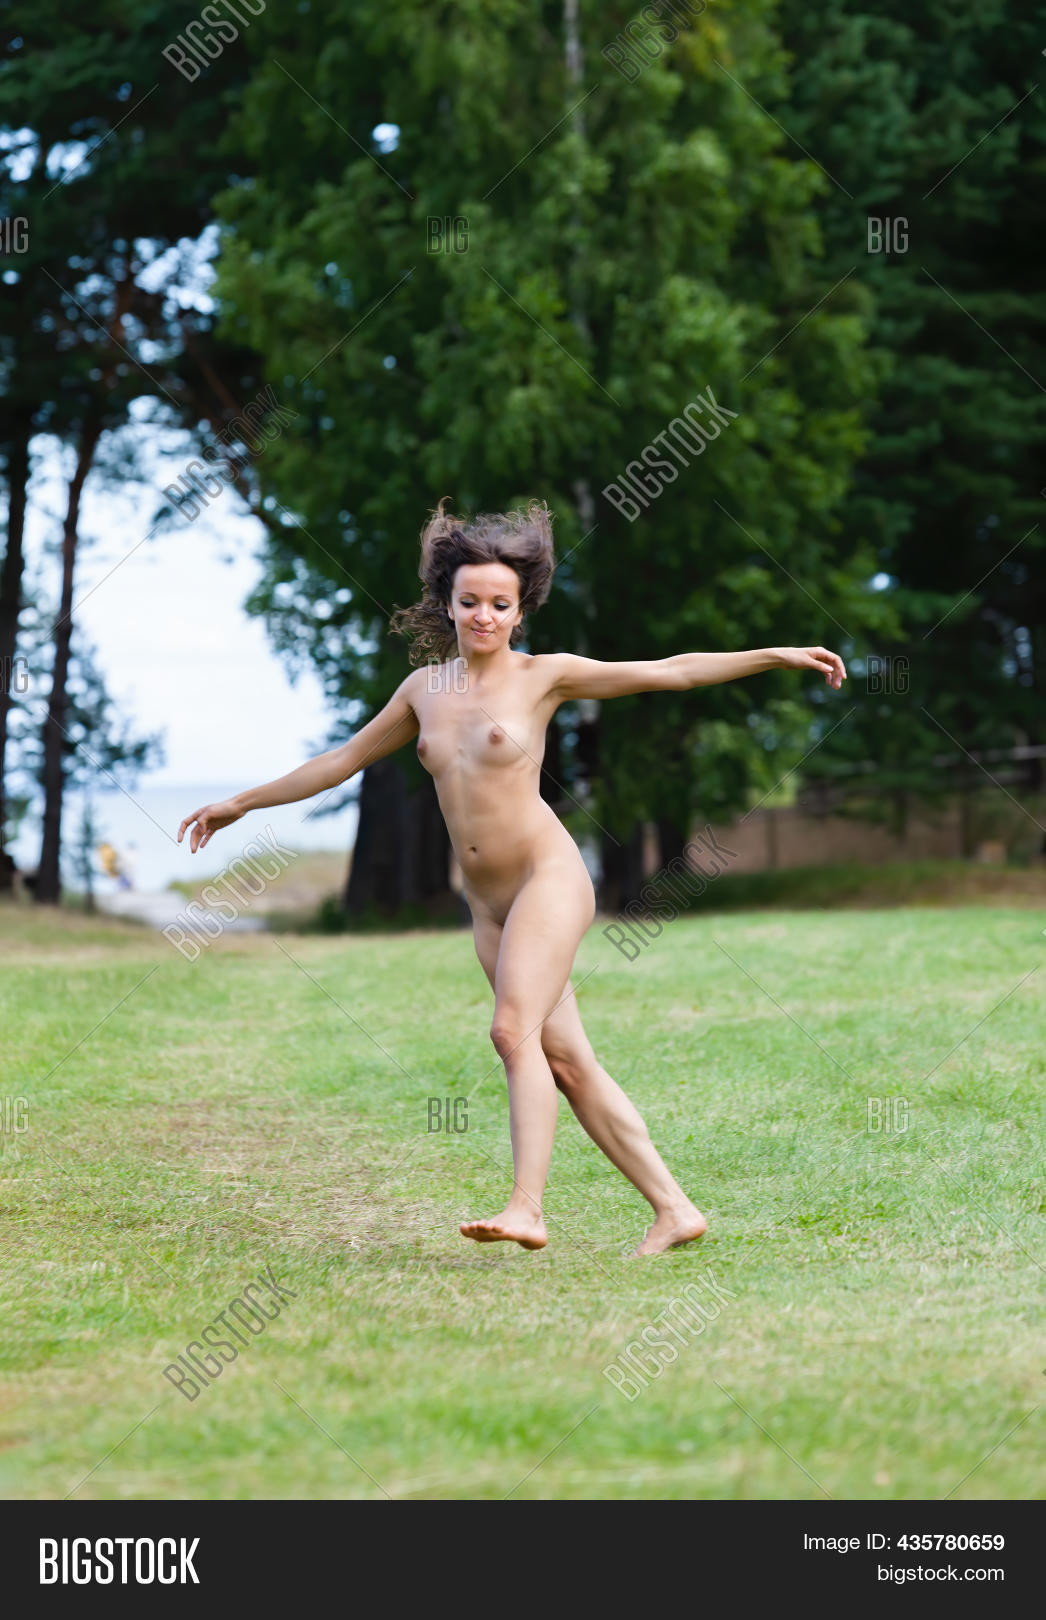 april bruns recommends naked women walking pic